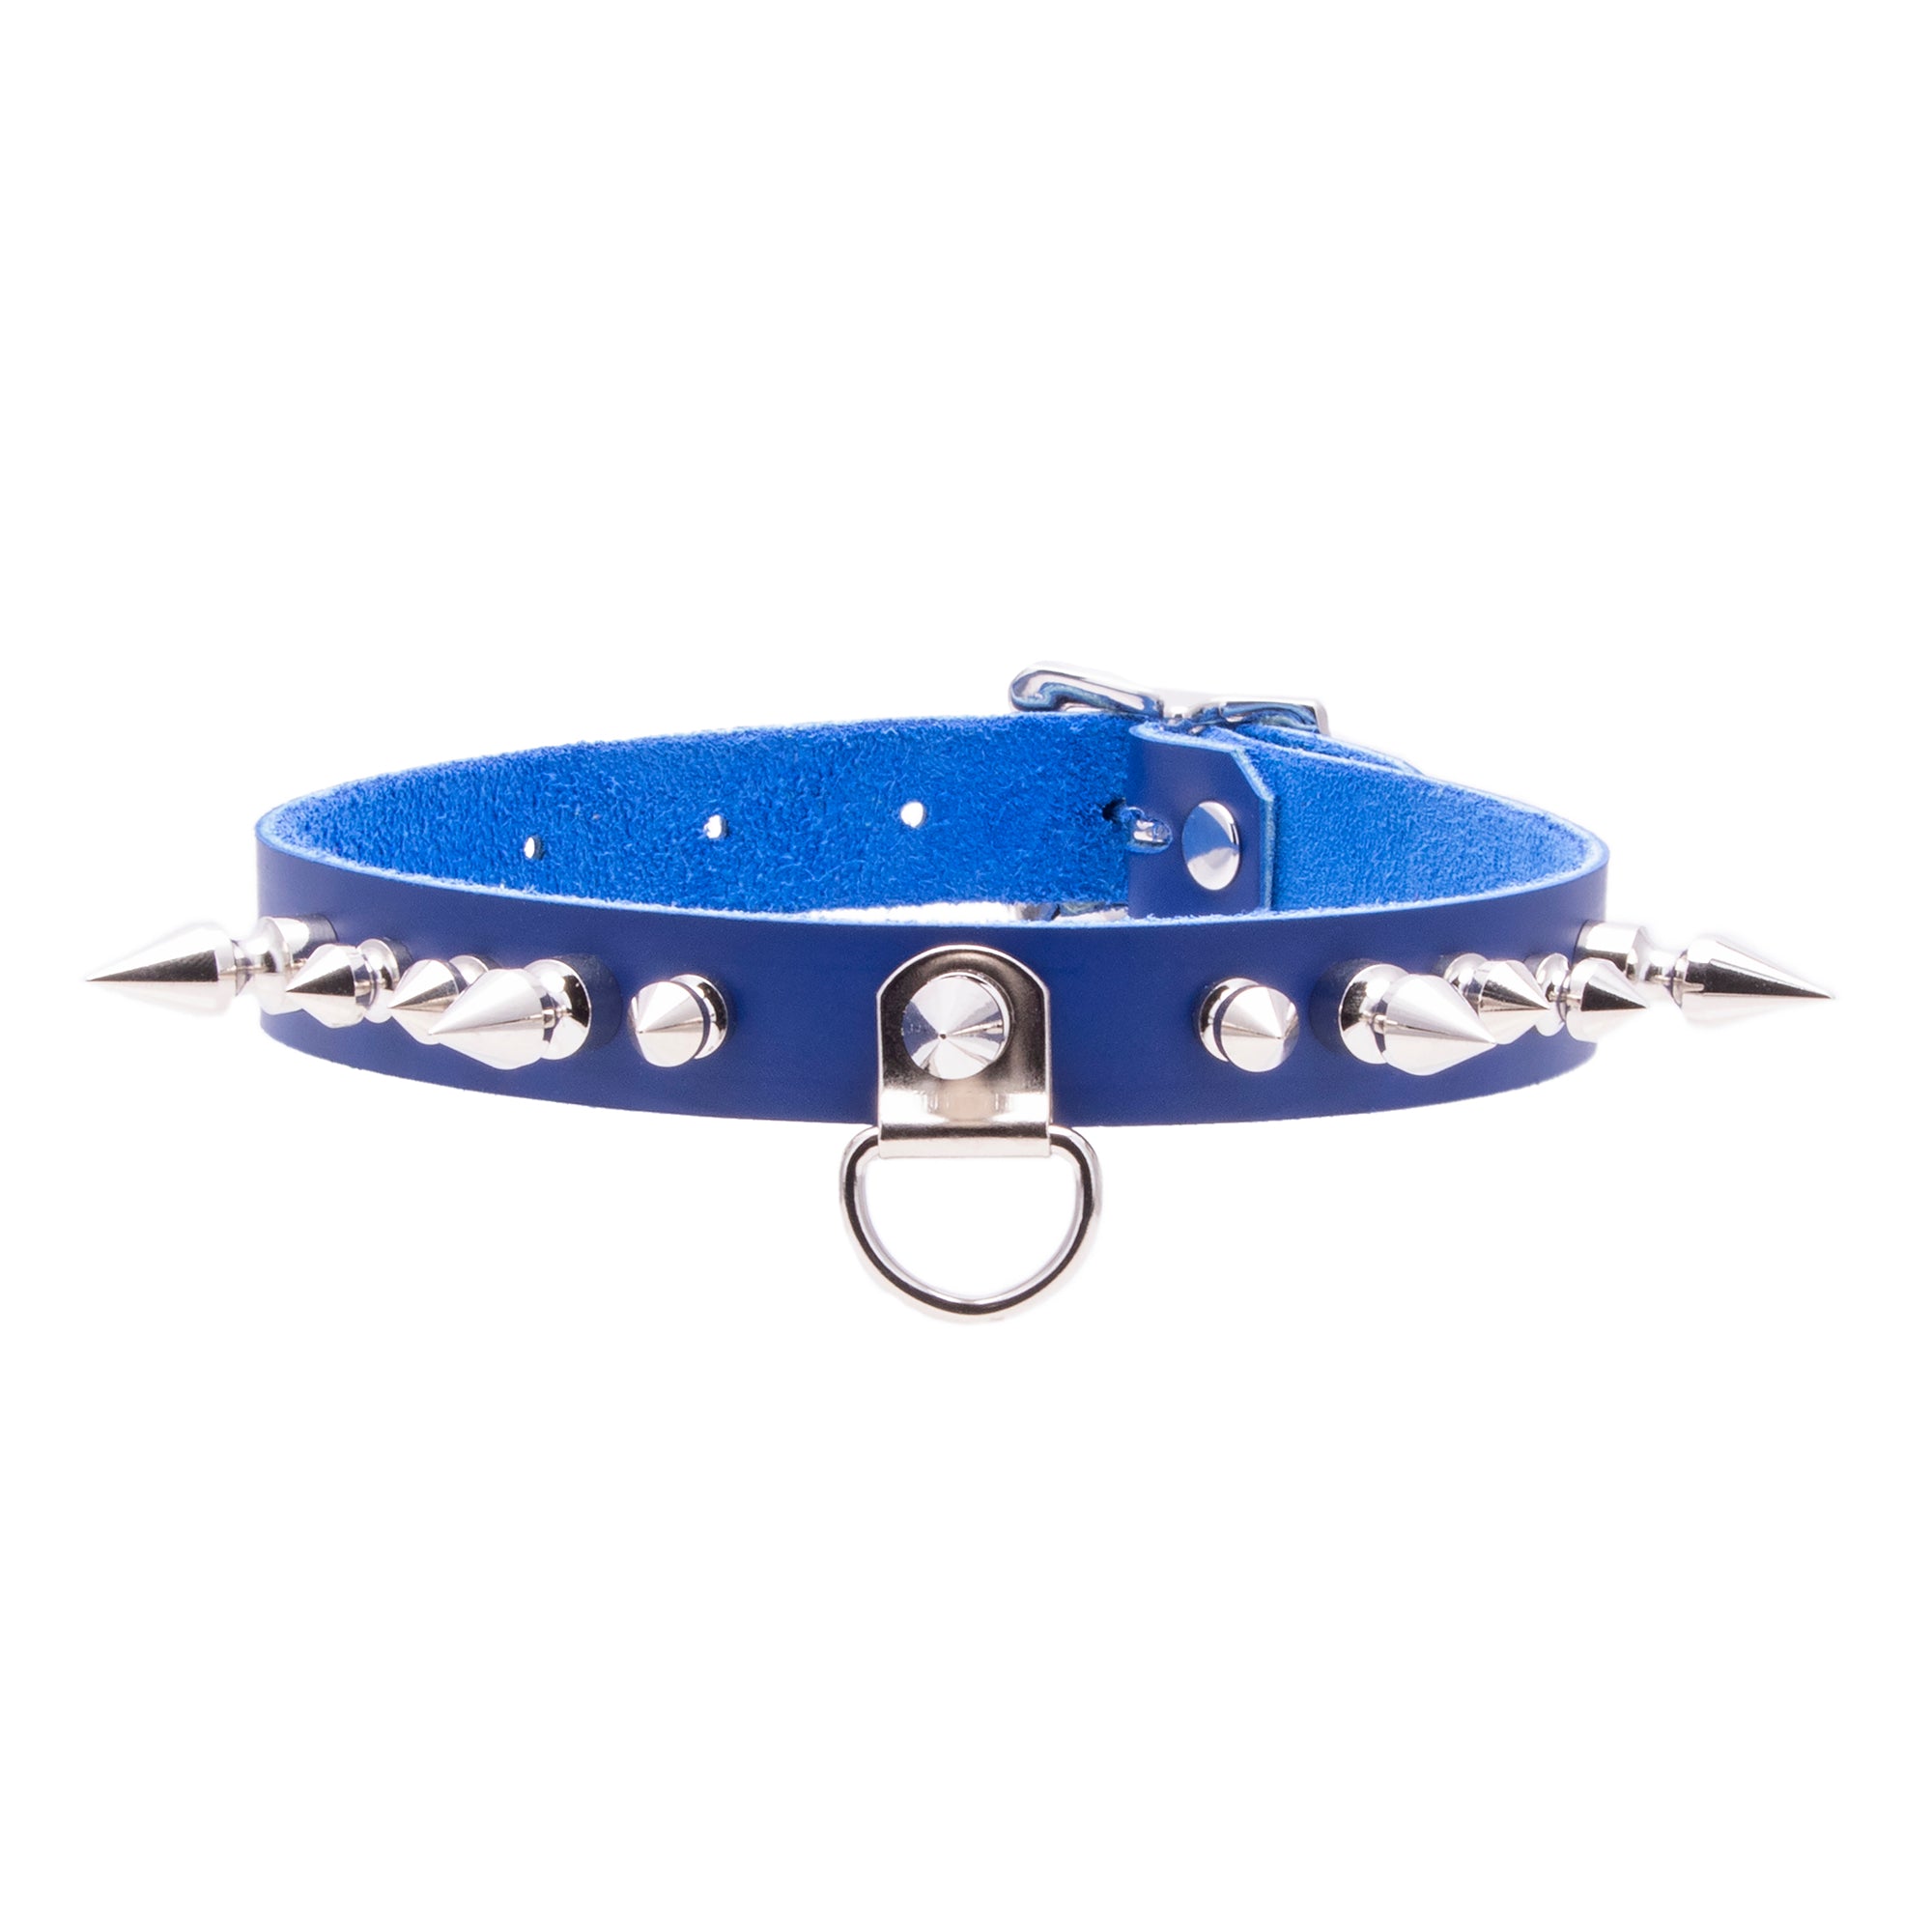 blue  Pawstar fierce Minx Collar with blakc or chrome spikes for goth fashion cosplay and costume.